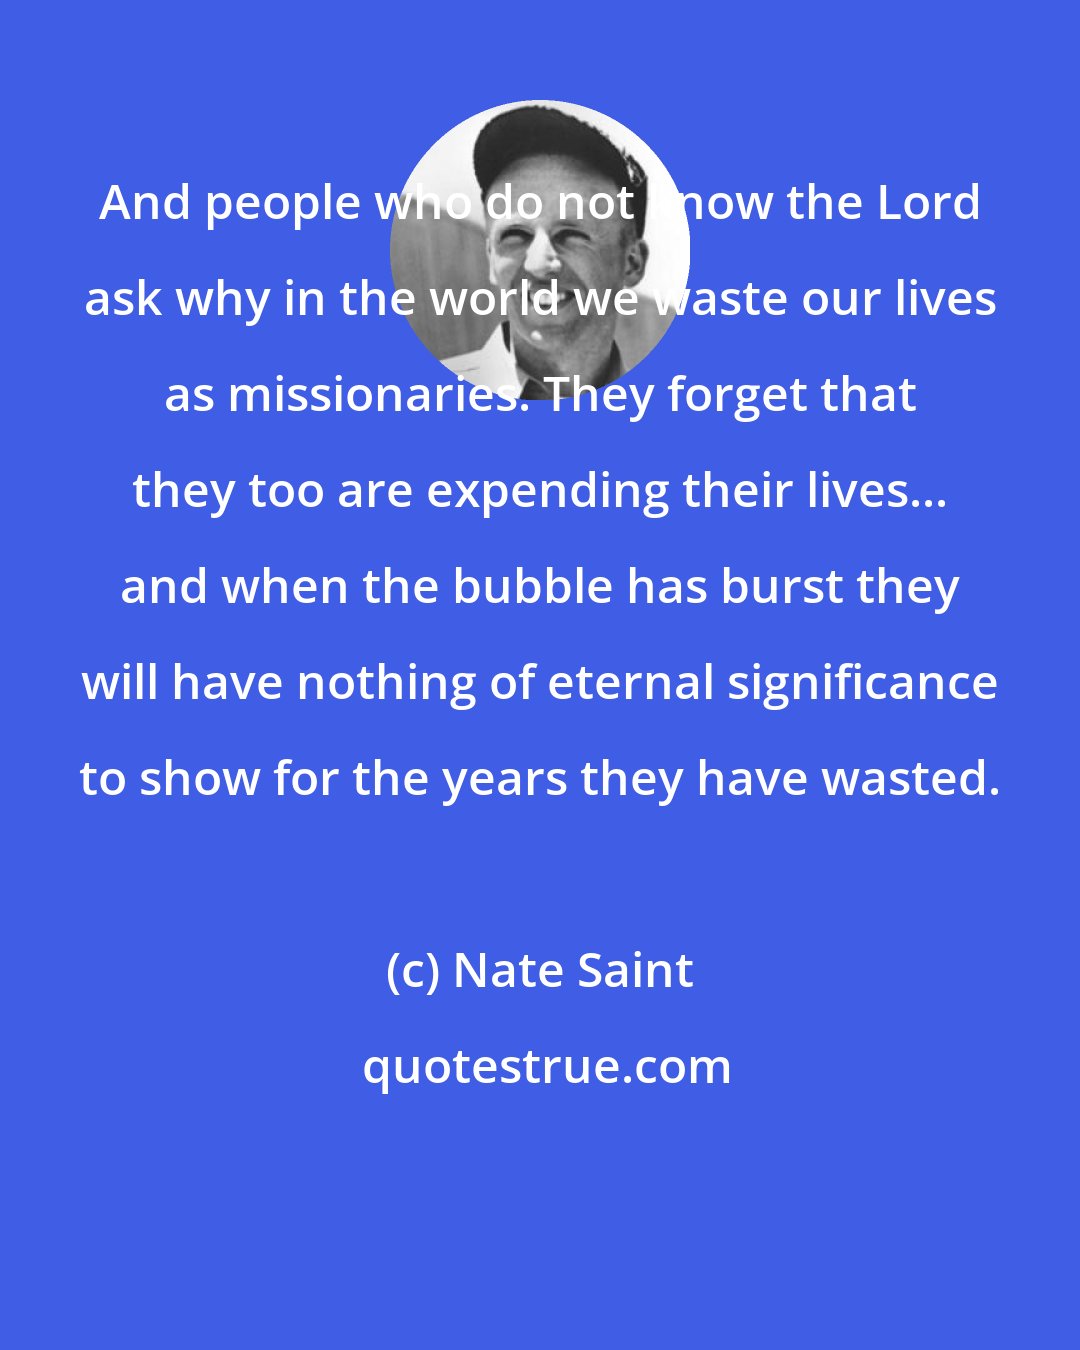 Nate Saint: And people who do not know the Lord ask why in the world we waste our lives as missionaries. They forget that they too are expending their lives... and when the bubble has burst they will have nothing of eternal significance to show for the years they have wasted.